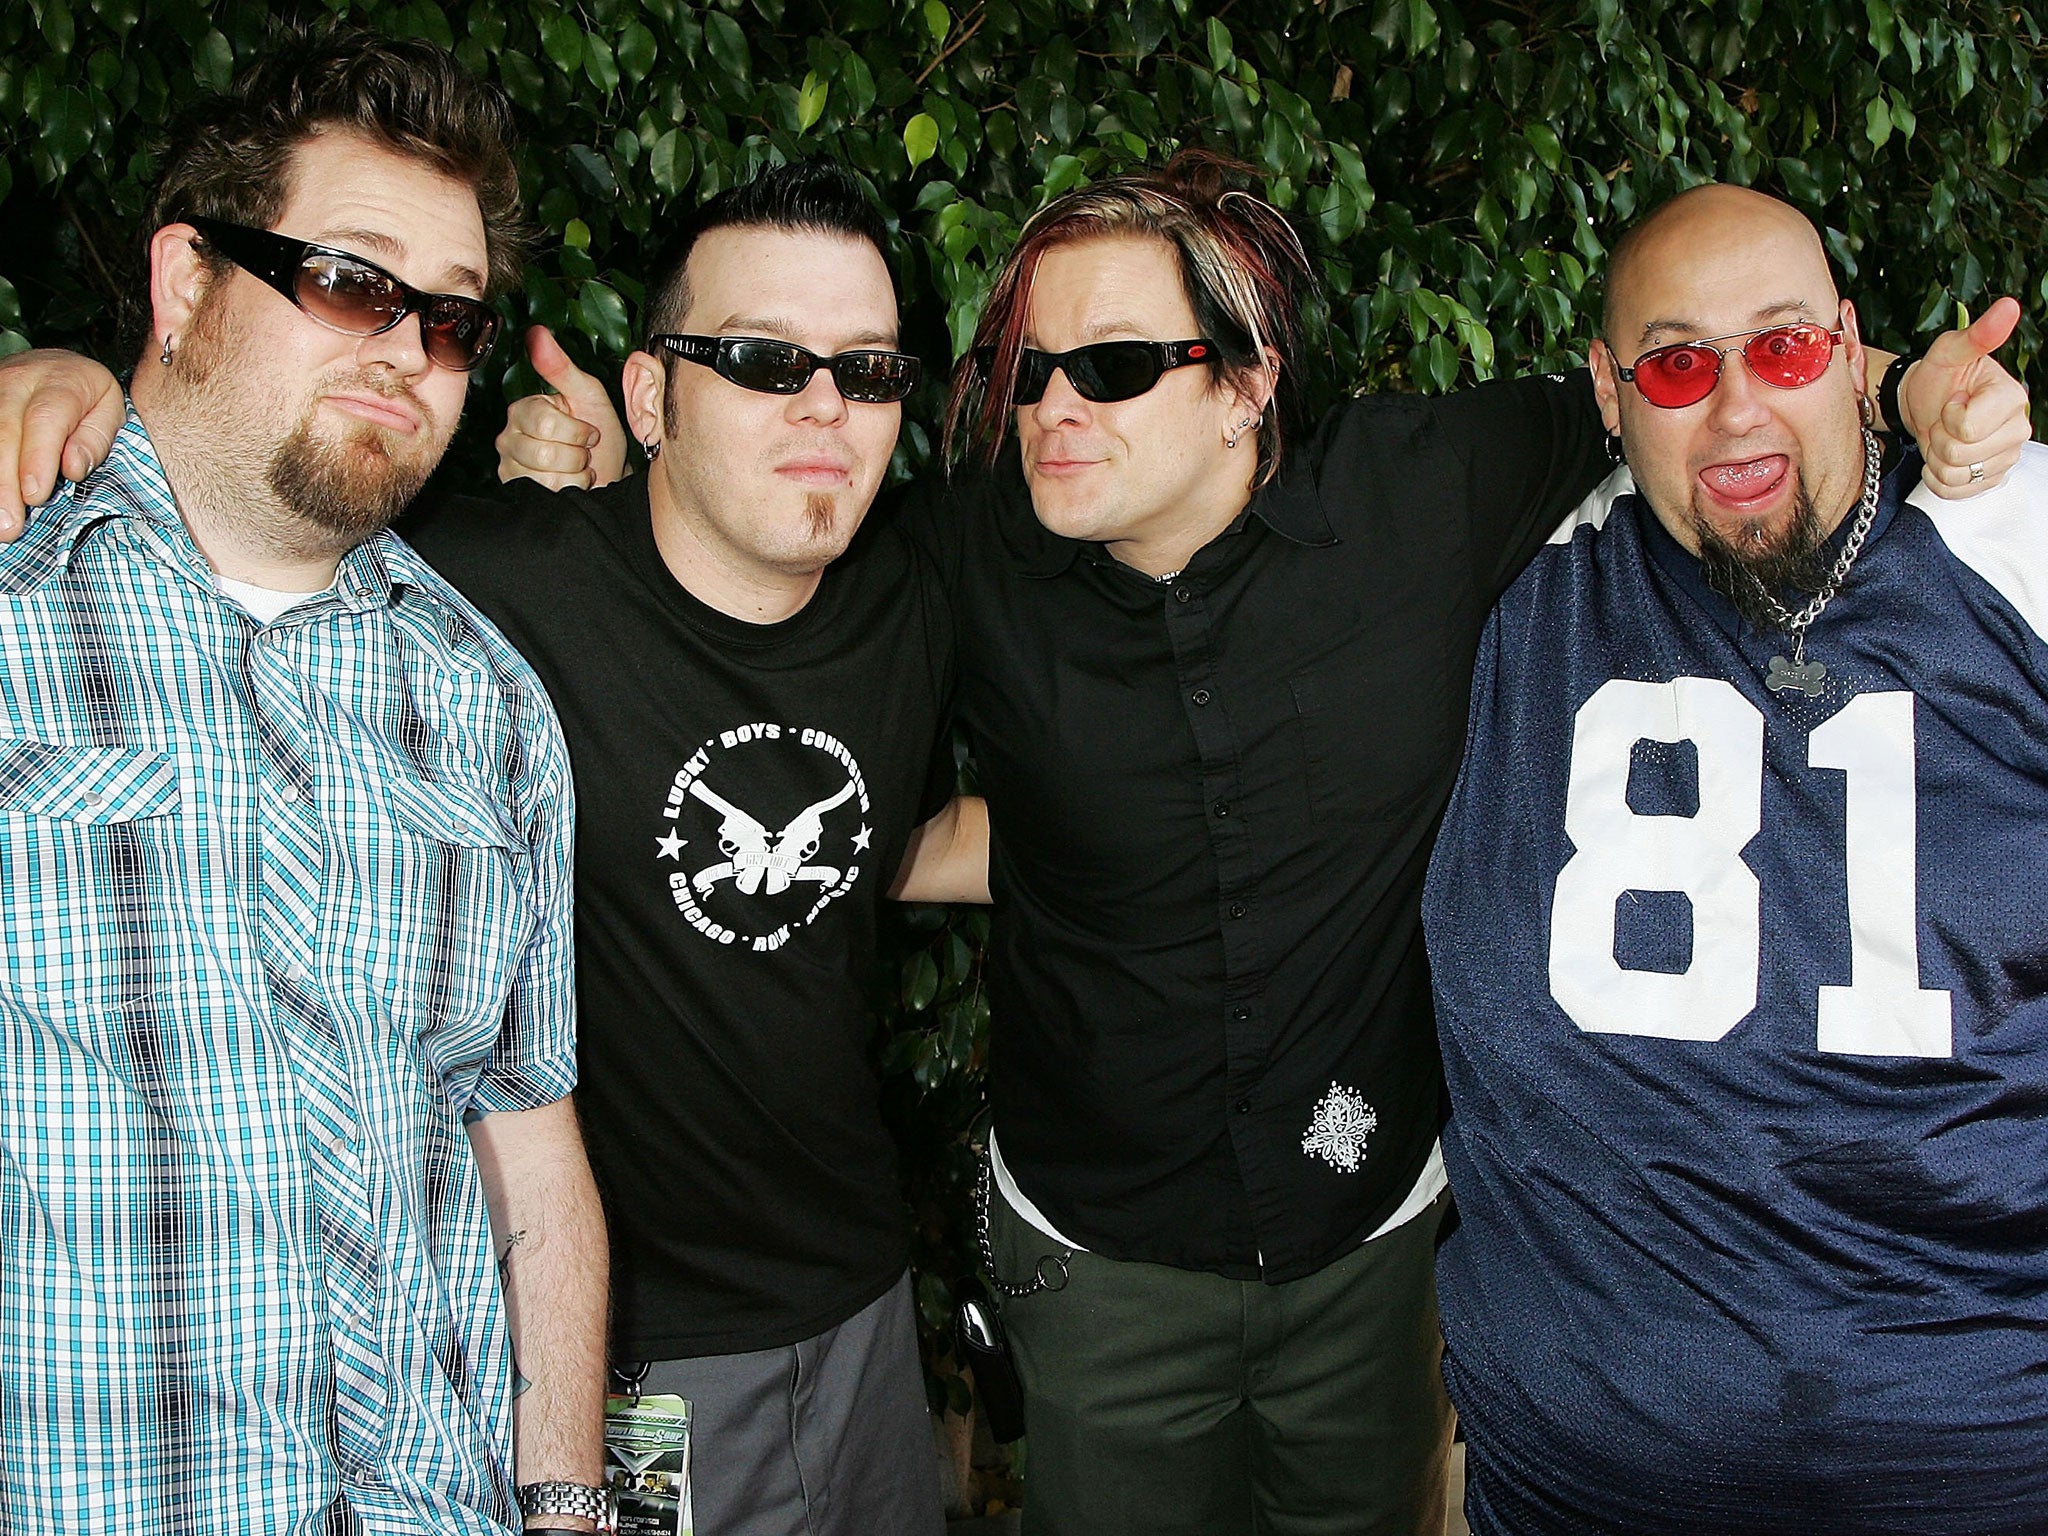 Bowling for Soup will be heading to the UK in February 2016